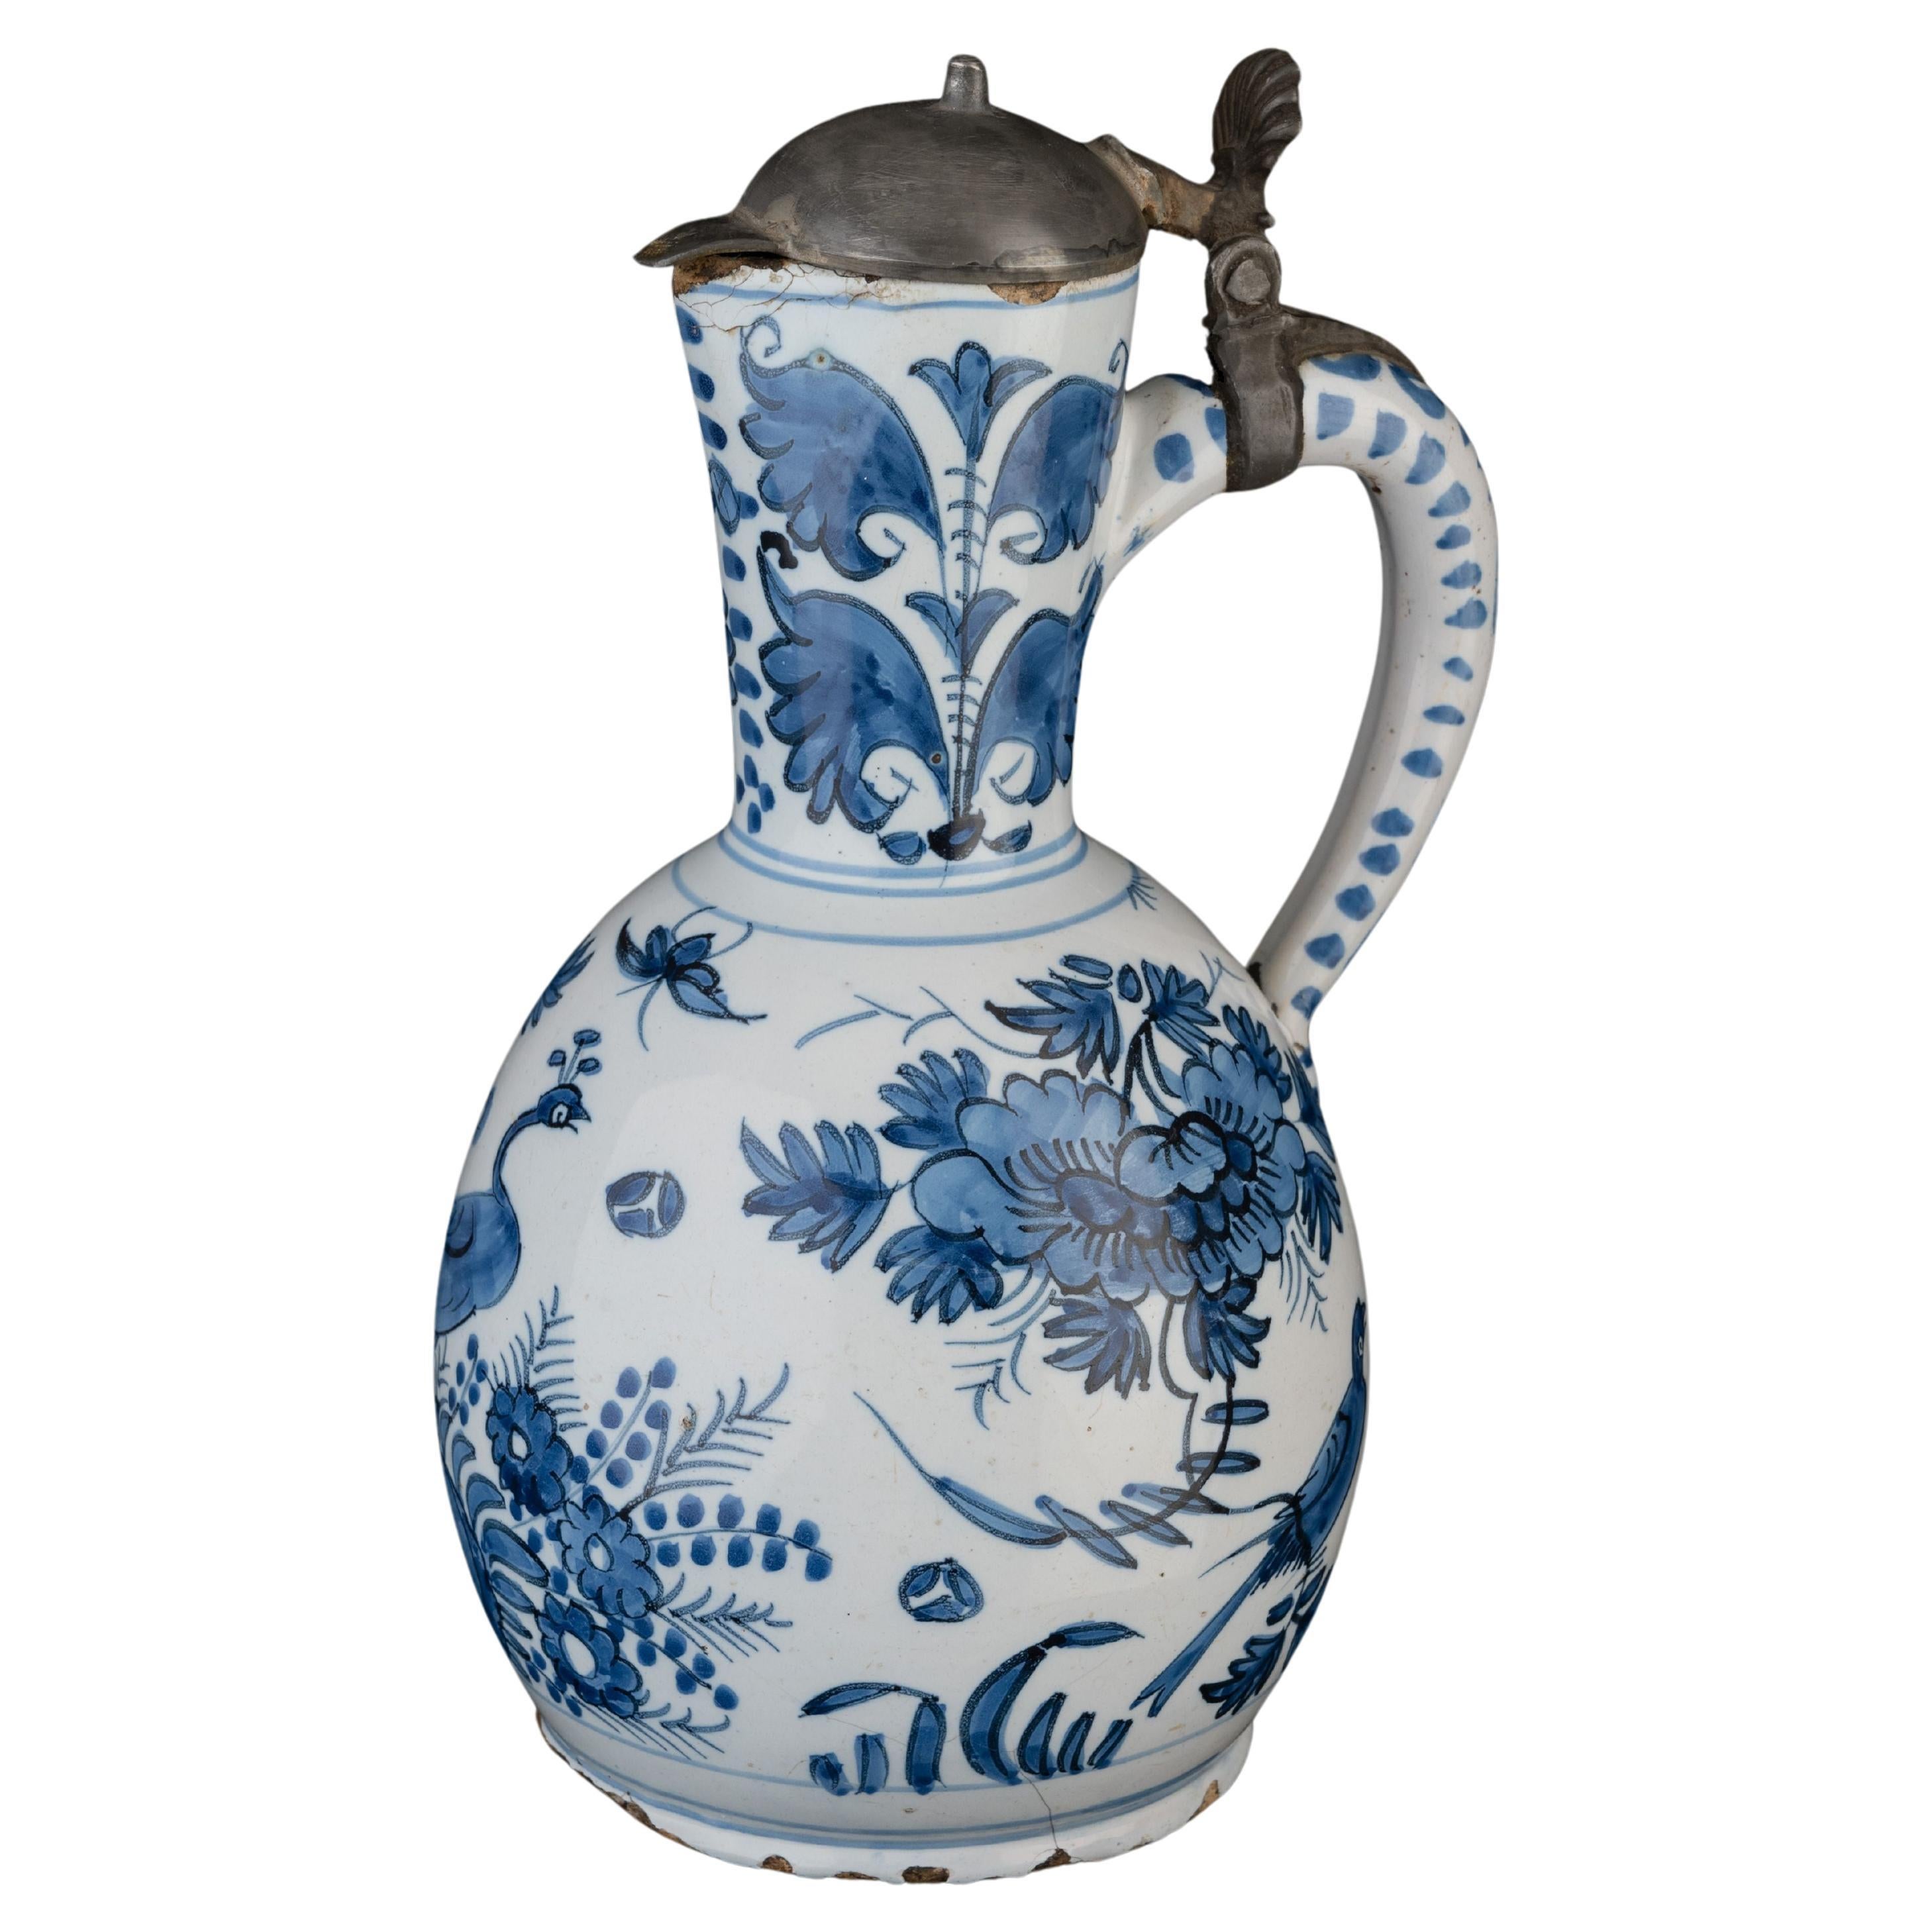 Delft, Wine jar with peacock and birds 1690-1700